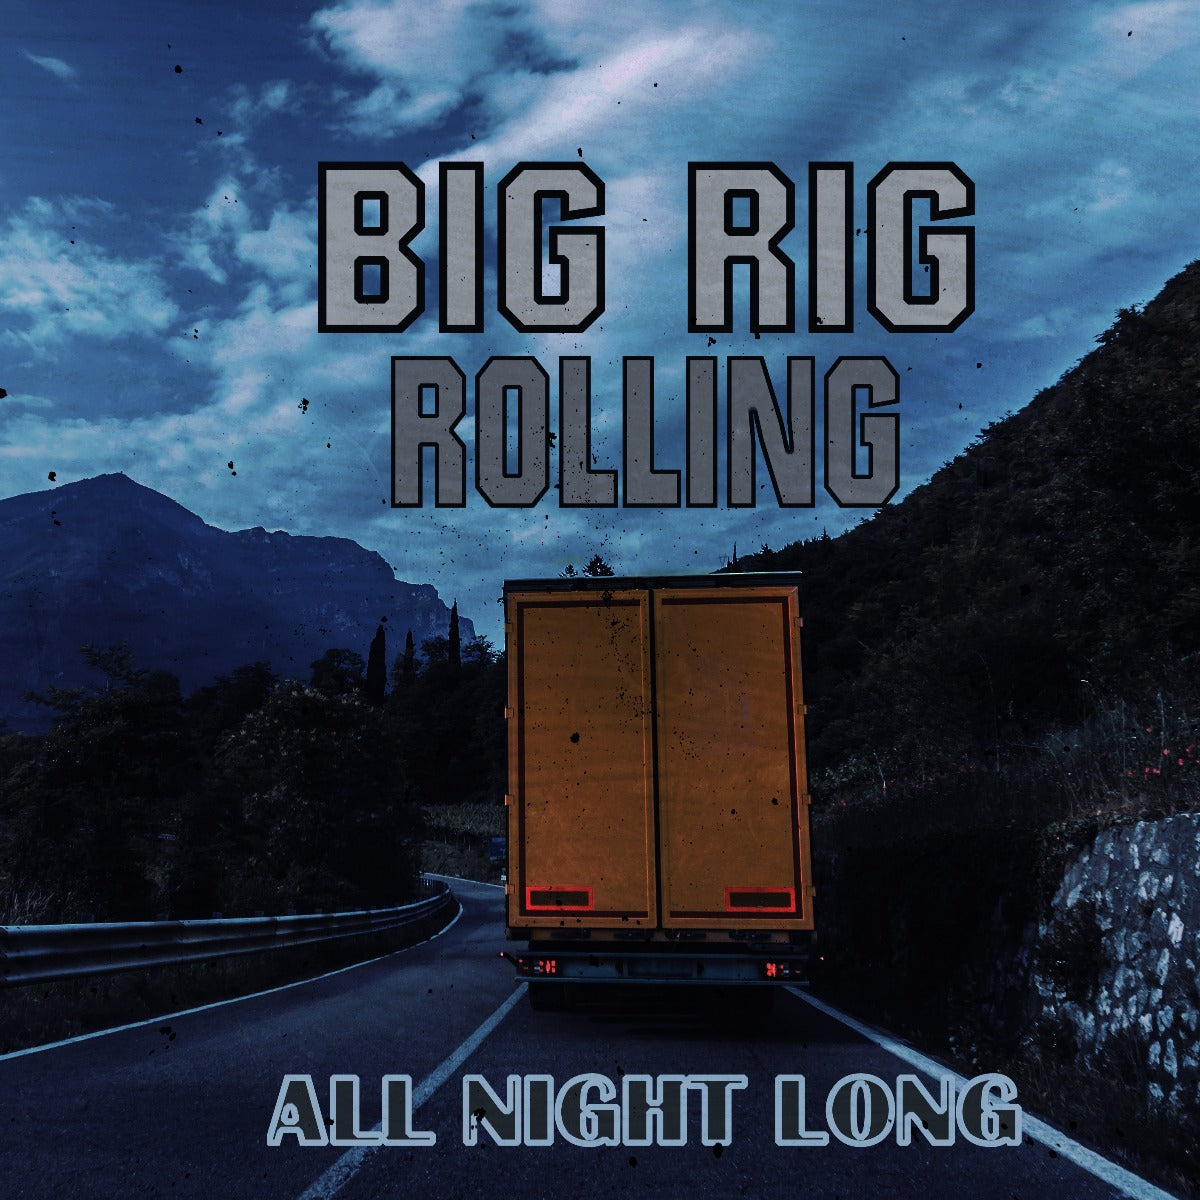 Big Rig Rolling All Night Long Vintage Sign